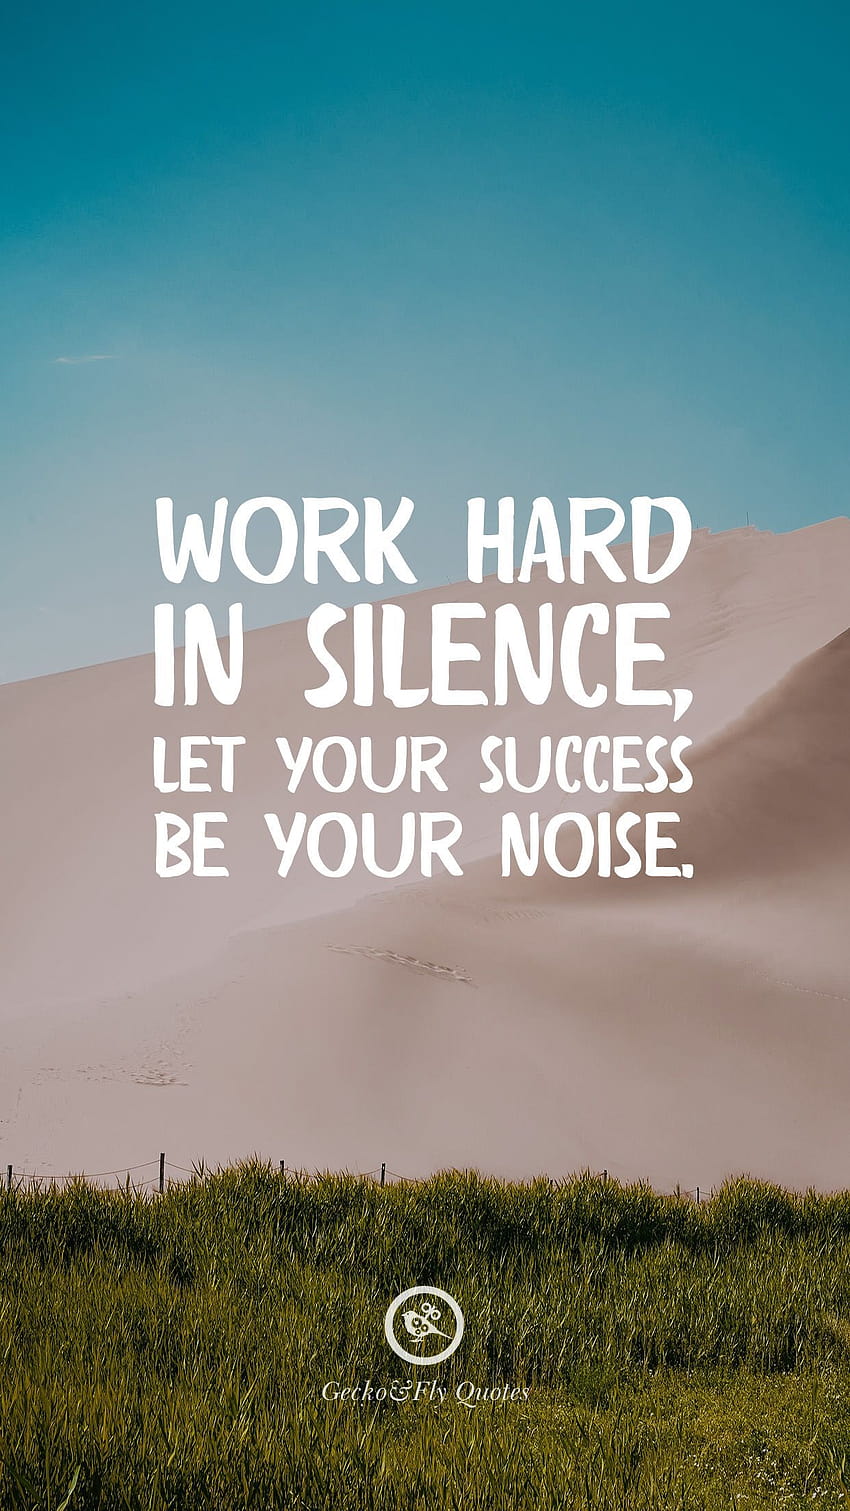 Work hard in silence, let your success be your noise., motivational quotes android HD phone wallpaper